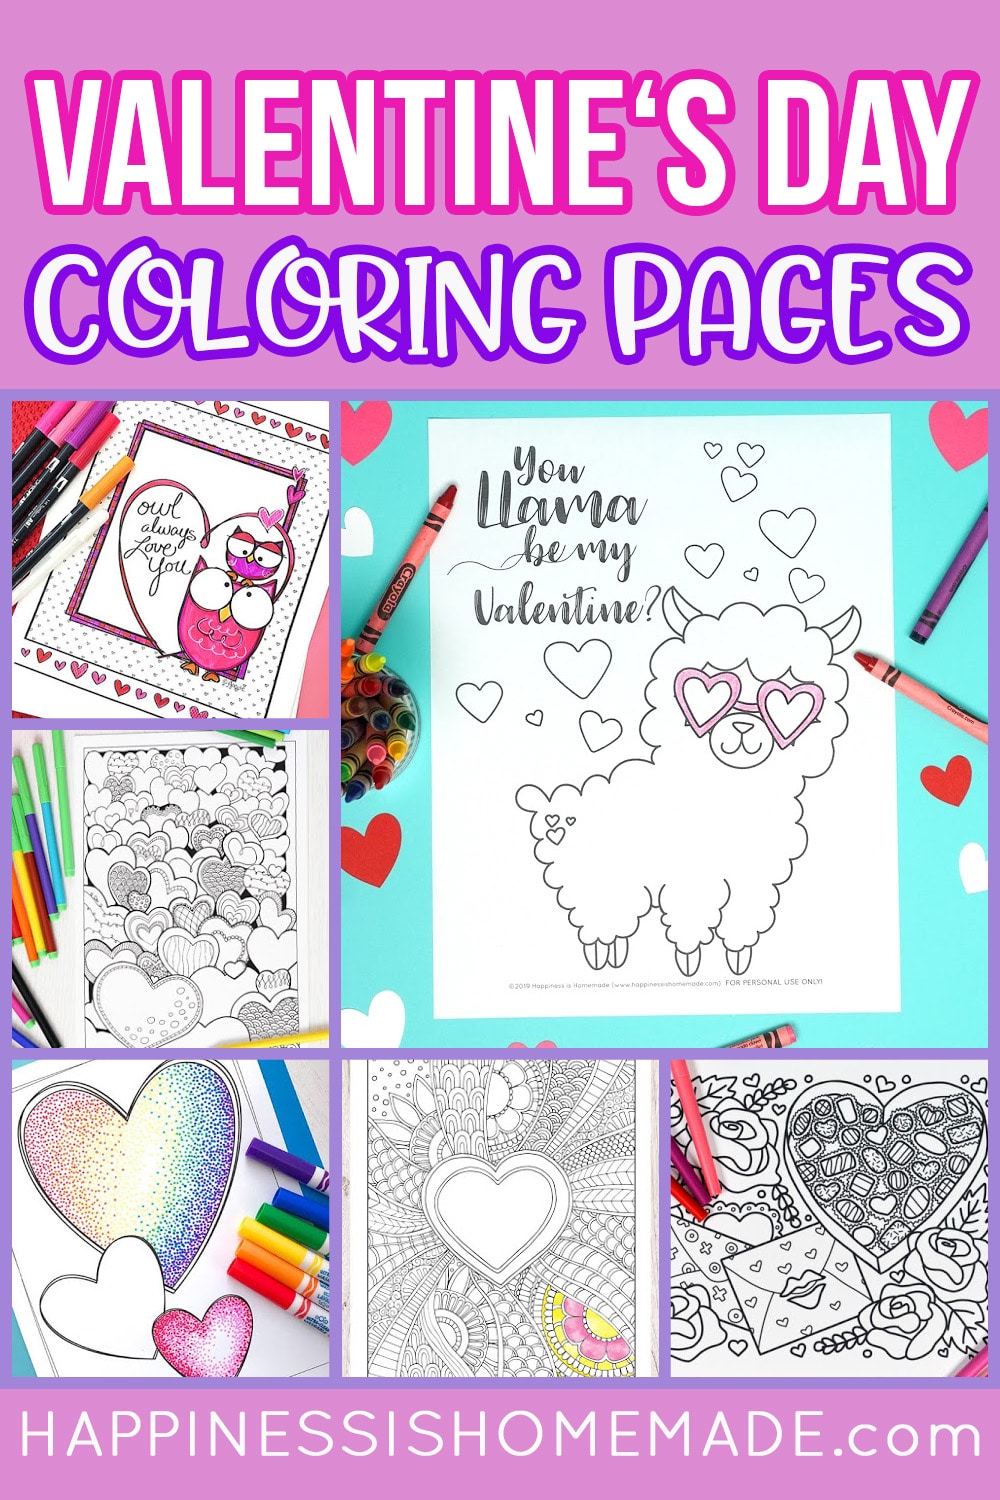 free printable kids coloring pages valentines